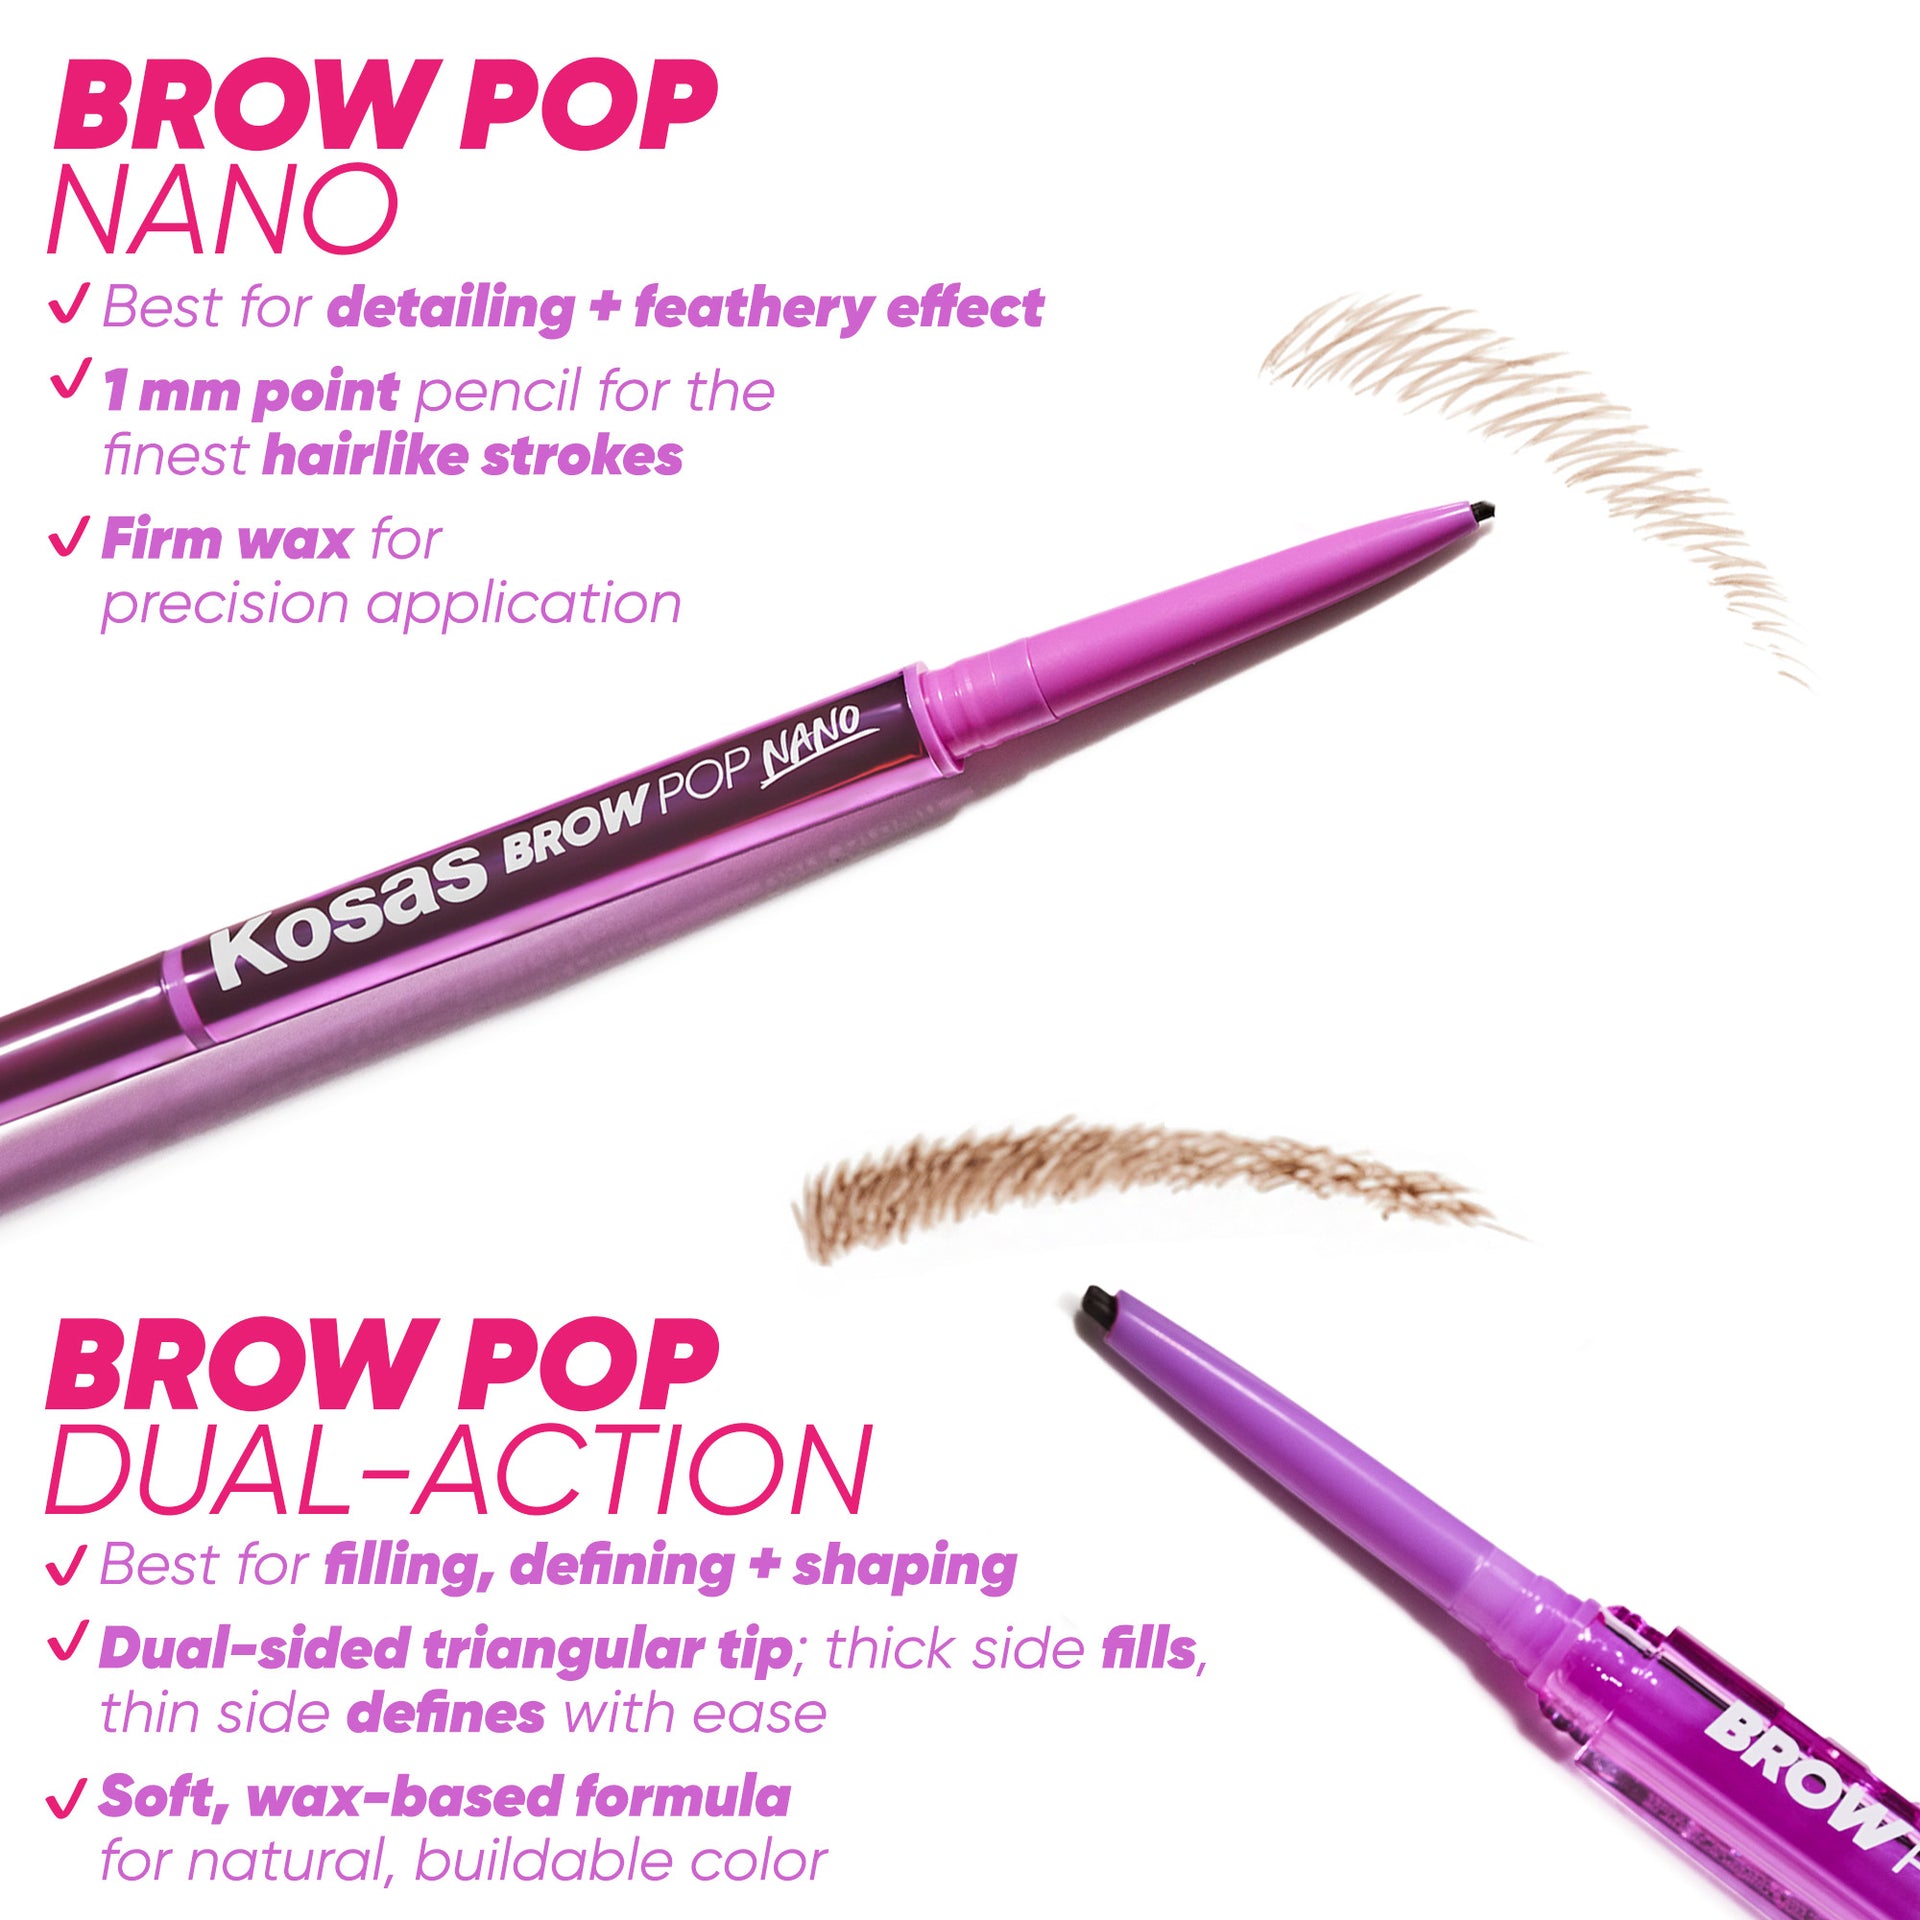 A visual comparison highlighting the differences between Kosas Brow Pop Nano and Brow Pop Dual-Action.